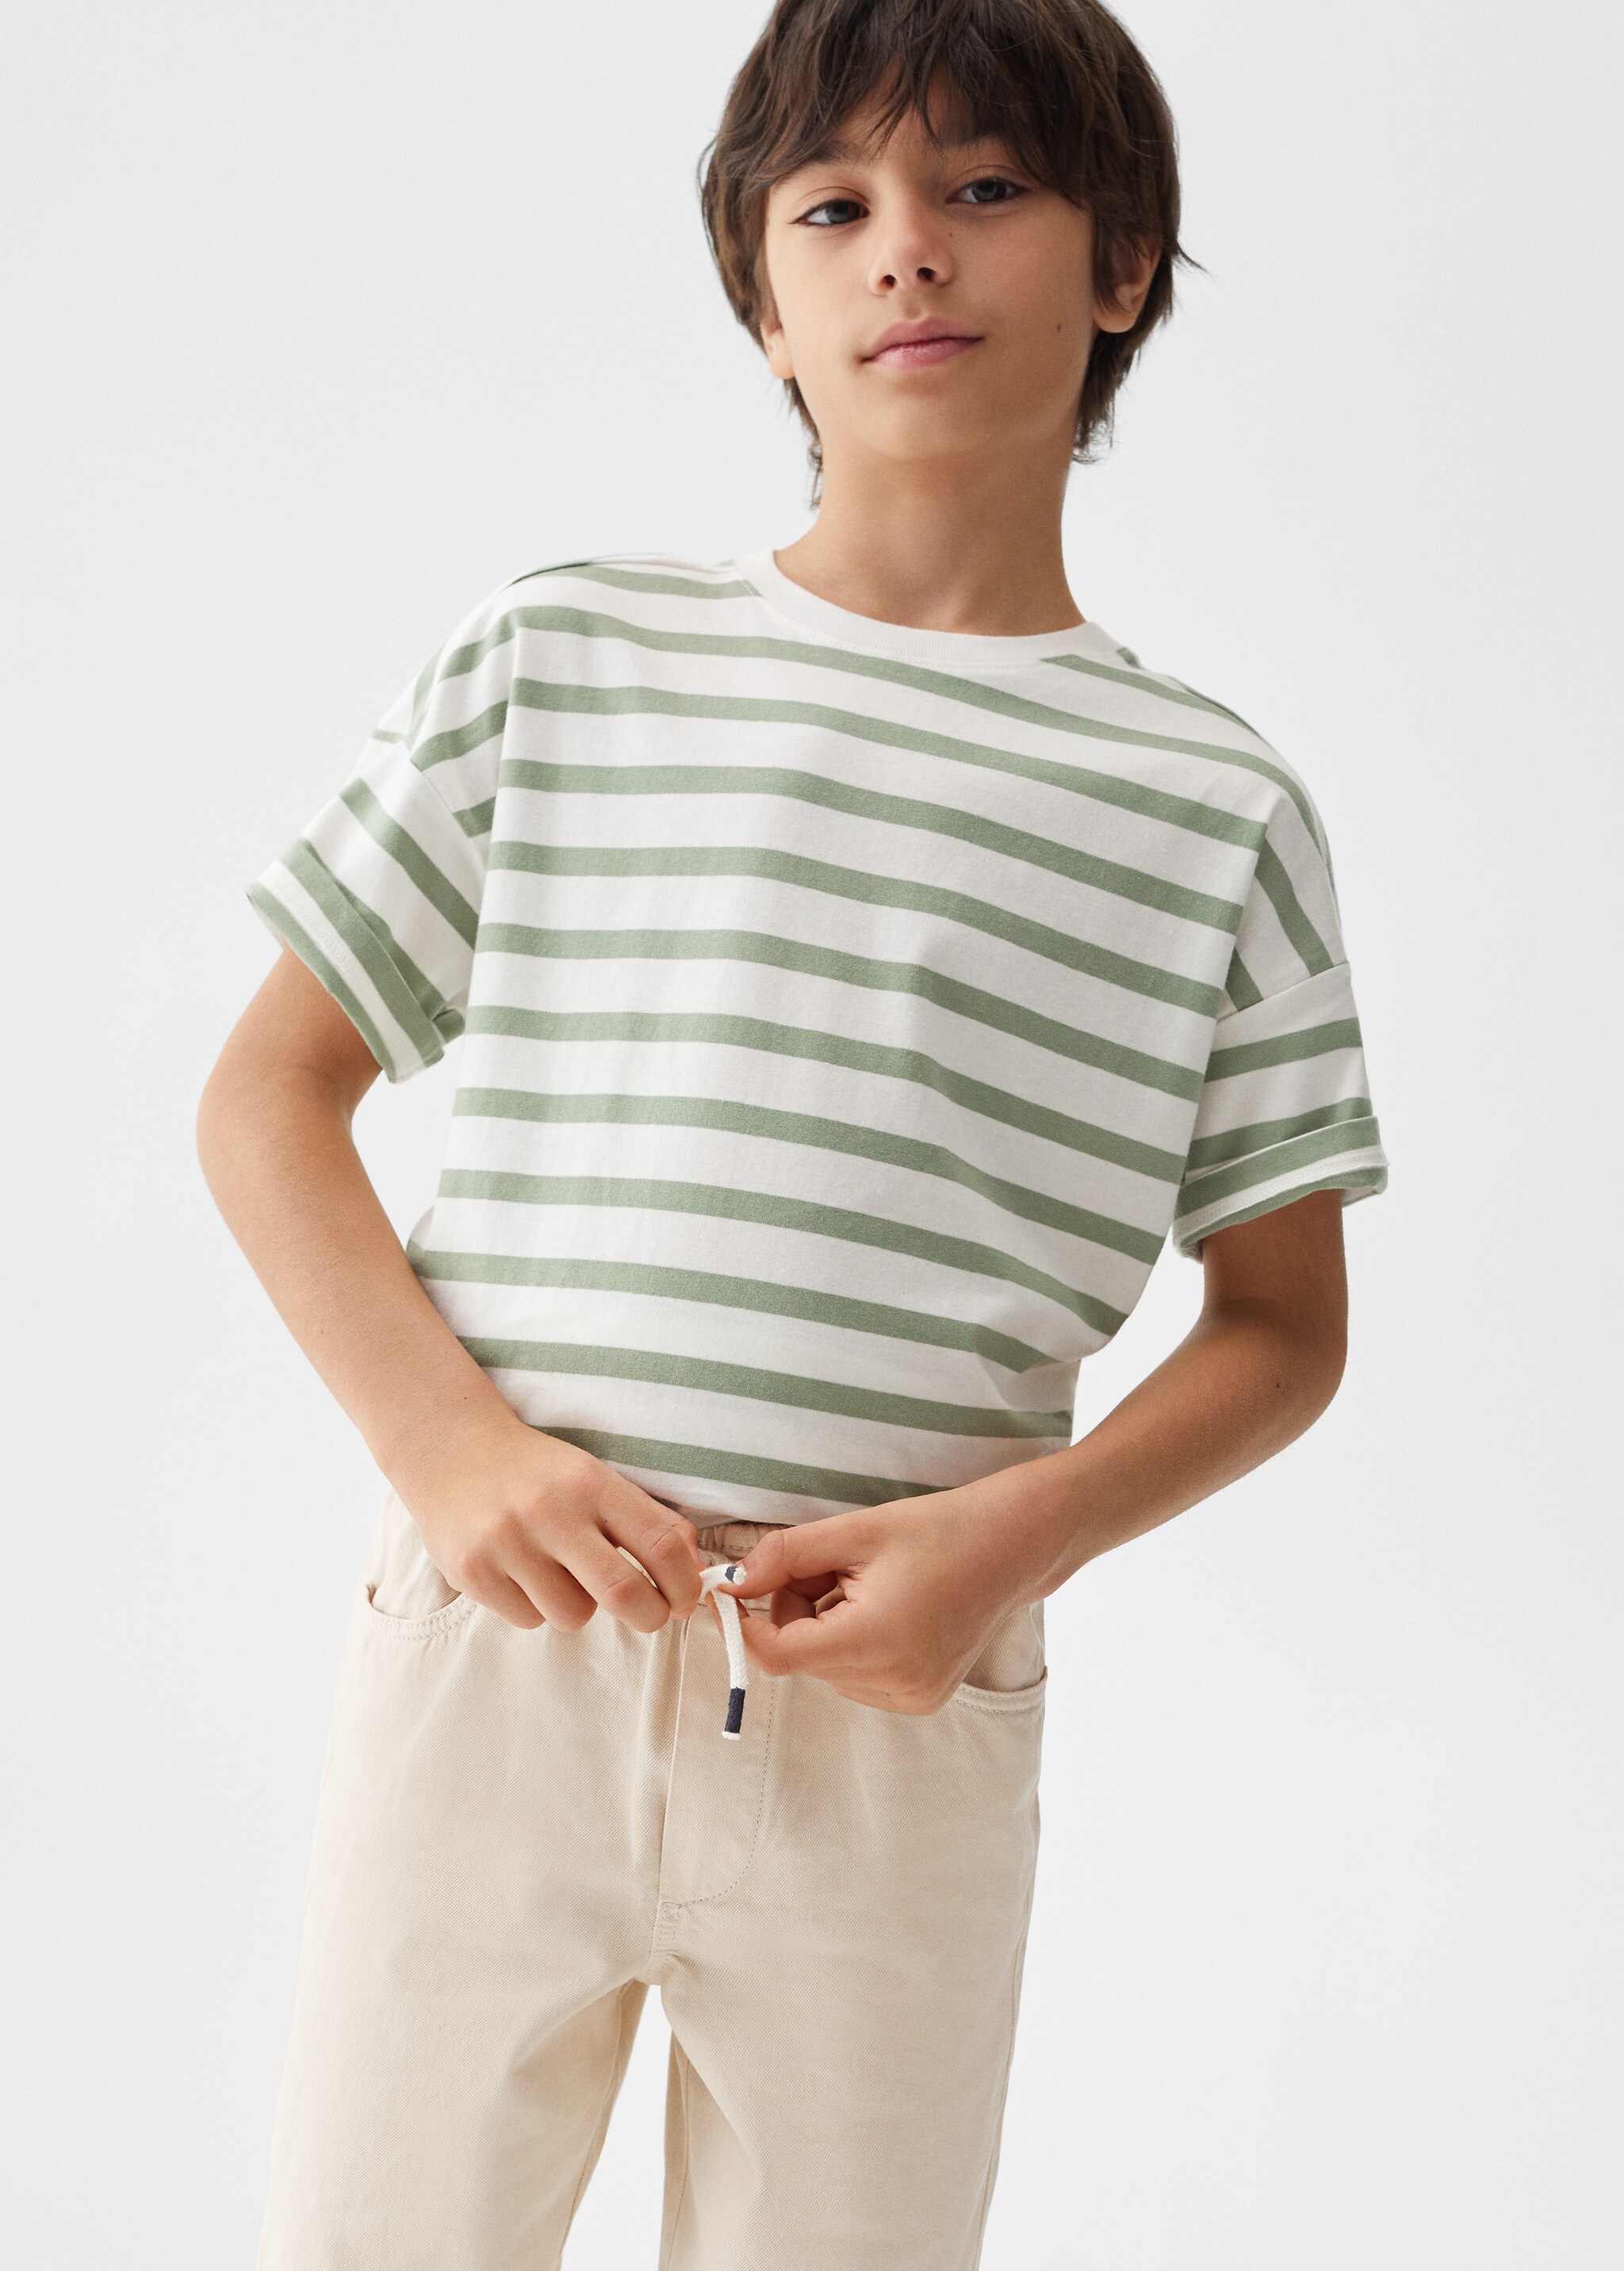 Cotton shorts with elastic waist - Details of the article 6